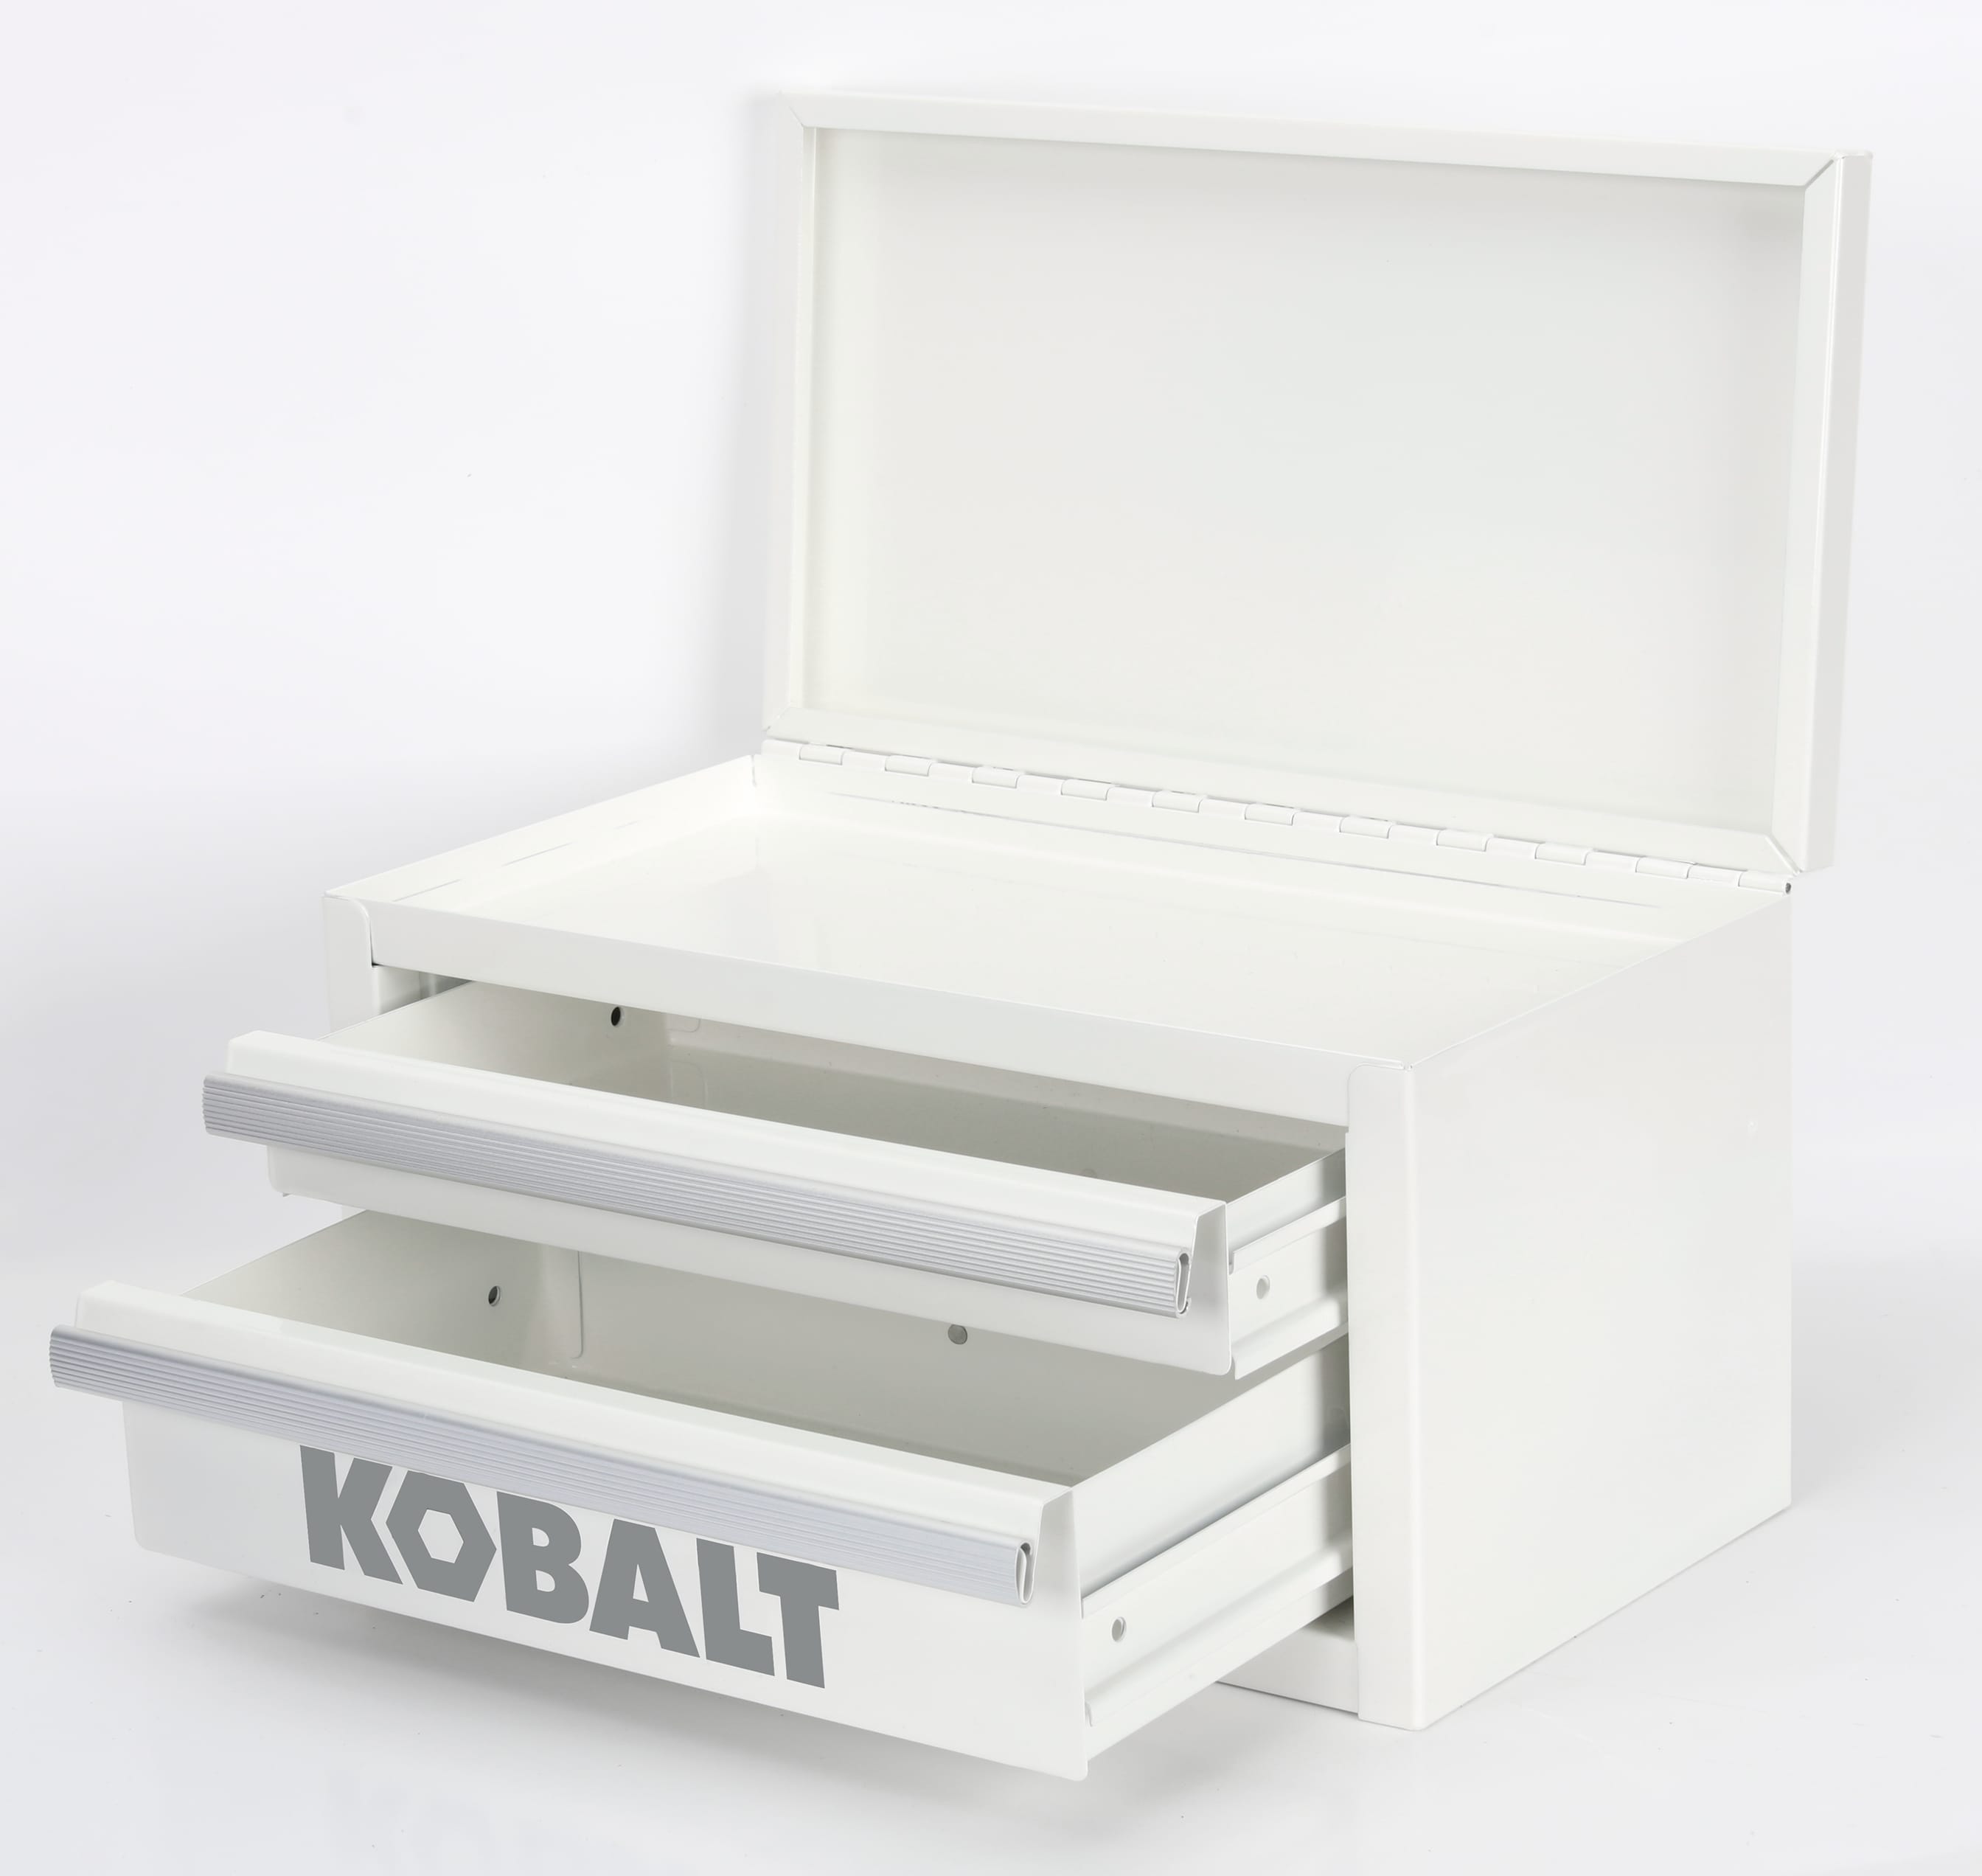 Kobalt Mini 10.83-in 2-Drawer Red Steel Tool Box in the Portable